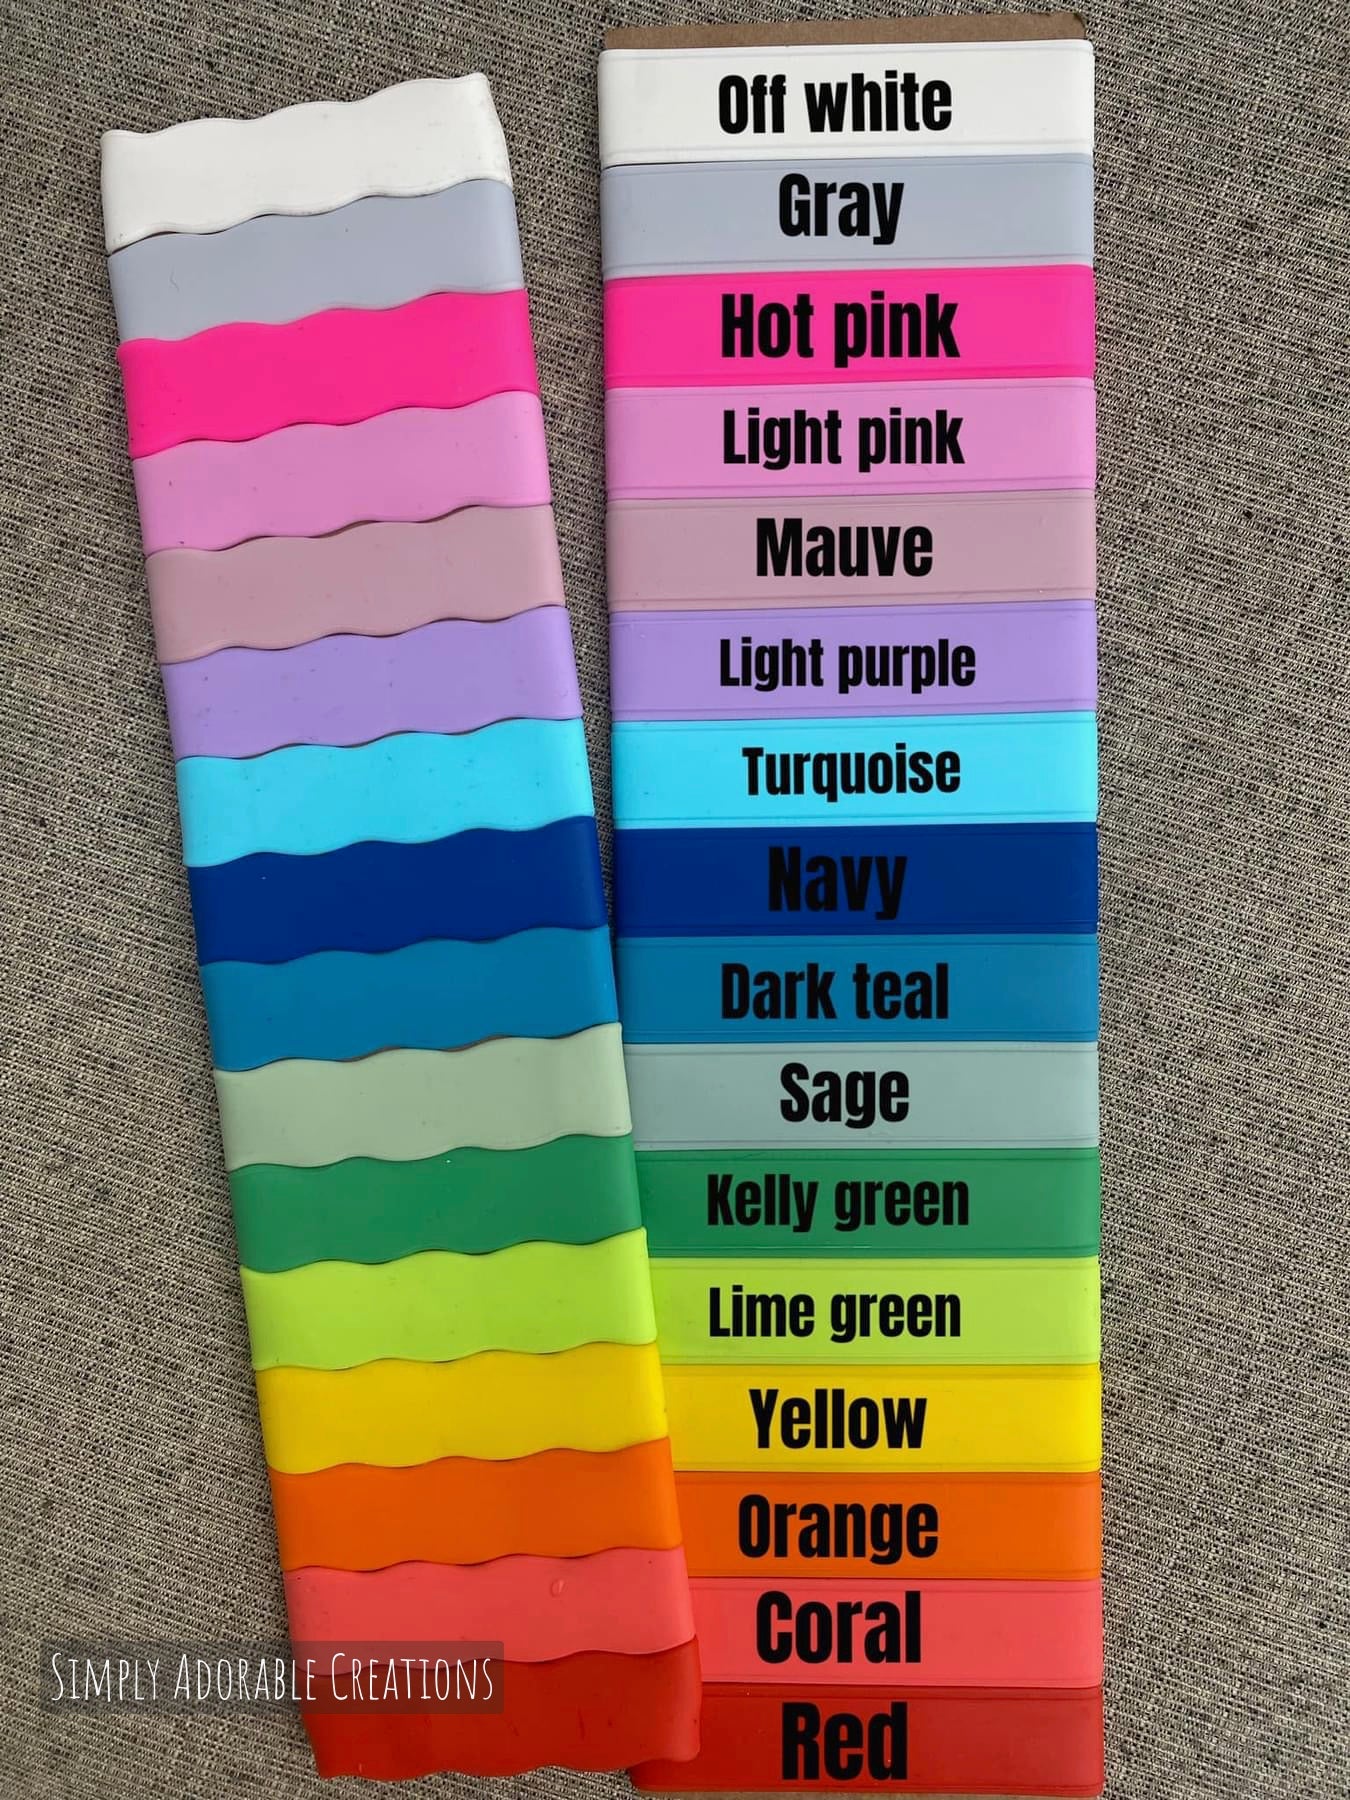 Personalized Silicone Bottle Bands